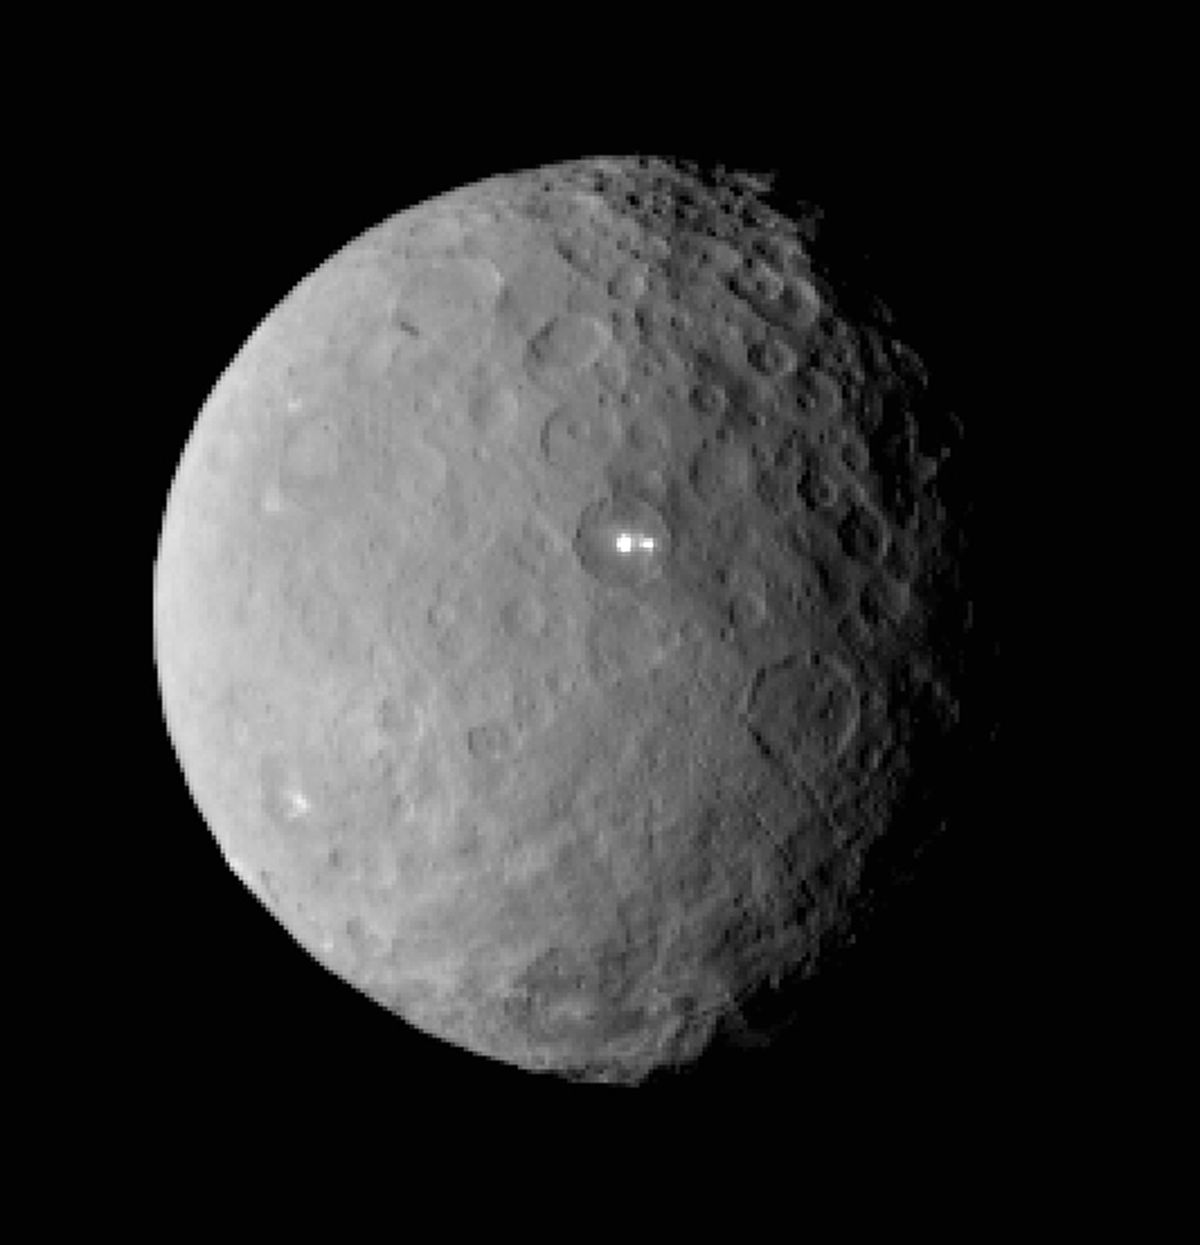 This Feb. 19, 2015 file image provided by NASA shows the dwarf planet Ceres, taken by the space agency's Dawn spacecraft from a distance of nearly 29,000 miles (46,000 kilometers). On Friday, March 6, 2015, NASAs Dawn spacecraft arrives at the mysterious dwarf planet located in the asteroid belt between Mars and Jupiter after a nearly eight-year journey. Dawn, which previously visited Vesta, also in the asteroid belt, has already beamed back images of Ceres as it closes in (AP Photo/NASA/JPL-Caltech/UCLA/MPS/DLR/IDA, File)